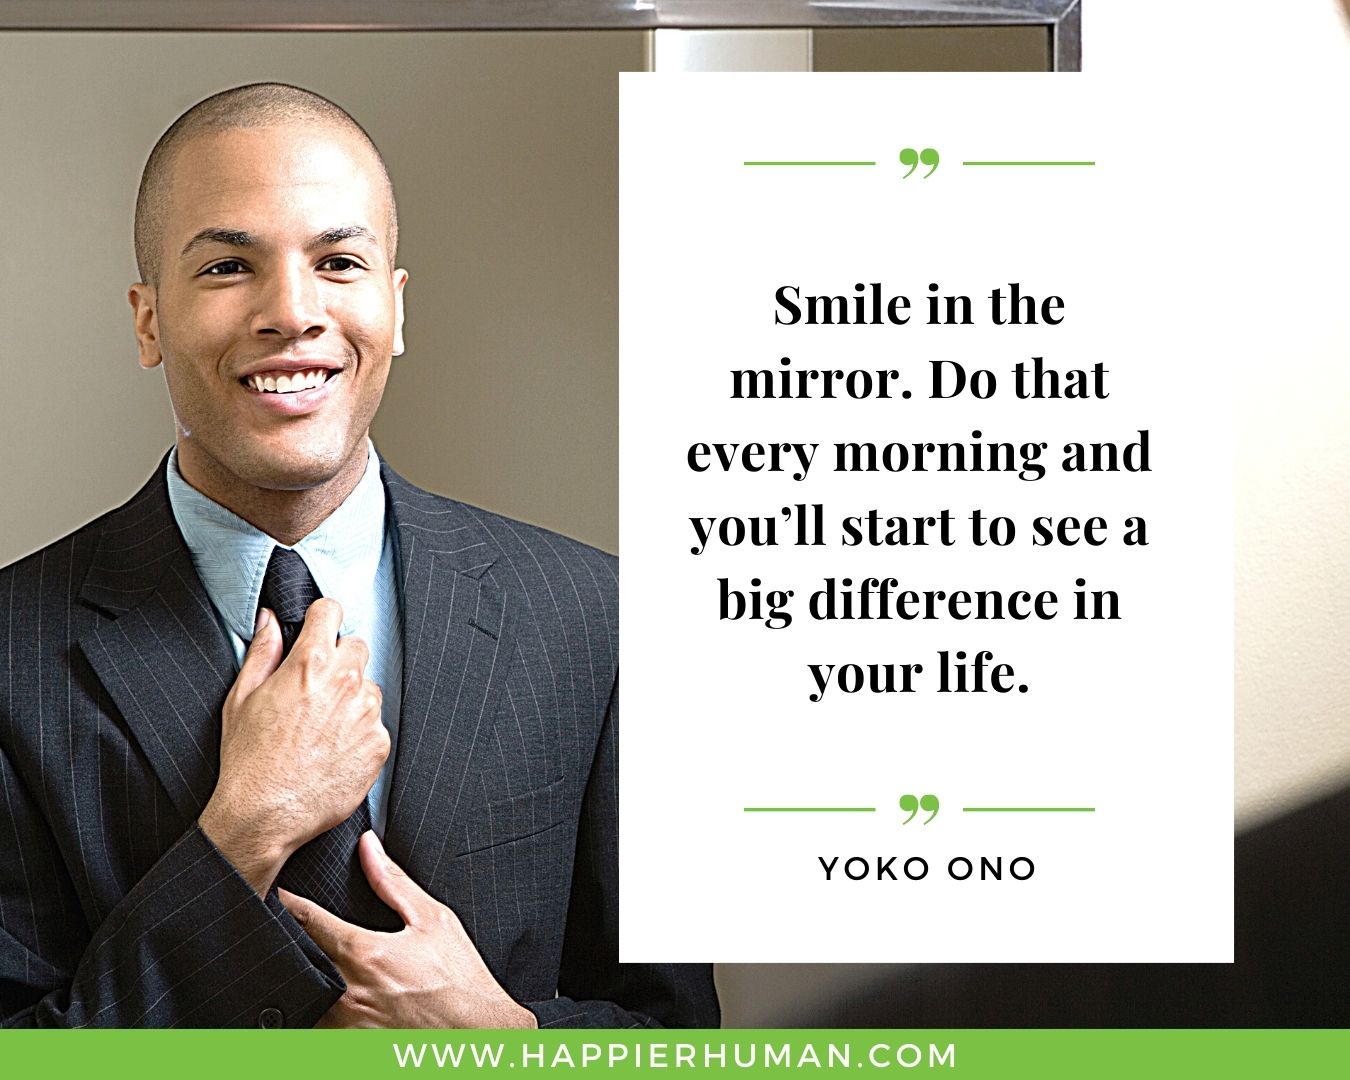 Great Day Quotes - “Smile in the mirror. Do that every morning and you’ll start to see a big difference in your life.” – Yoko Ono